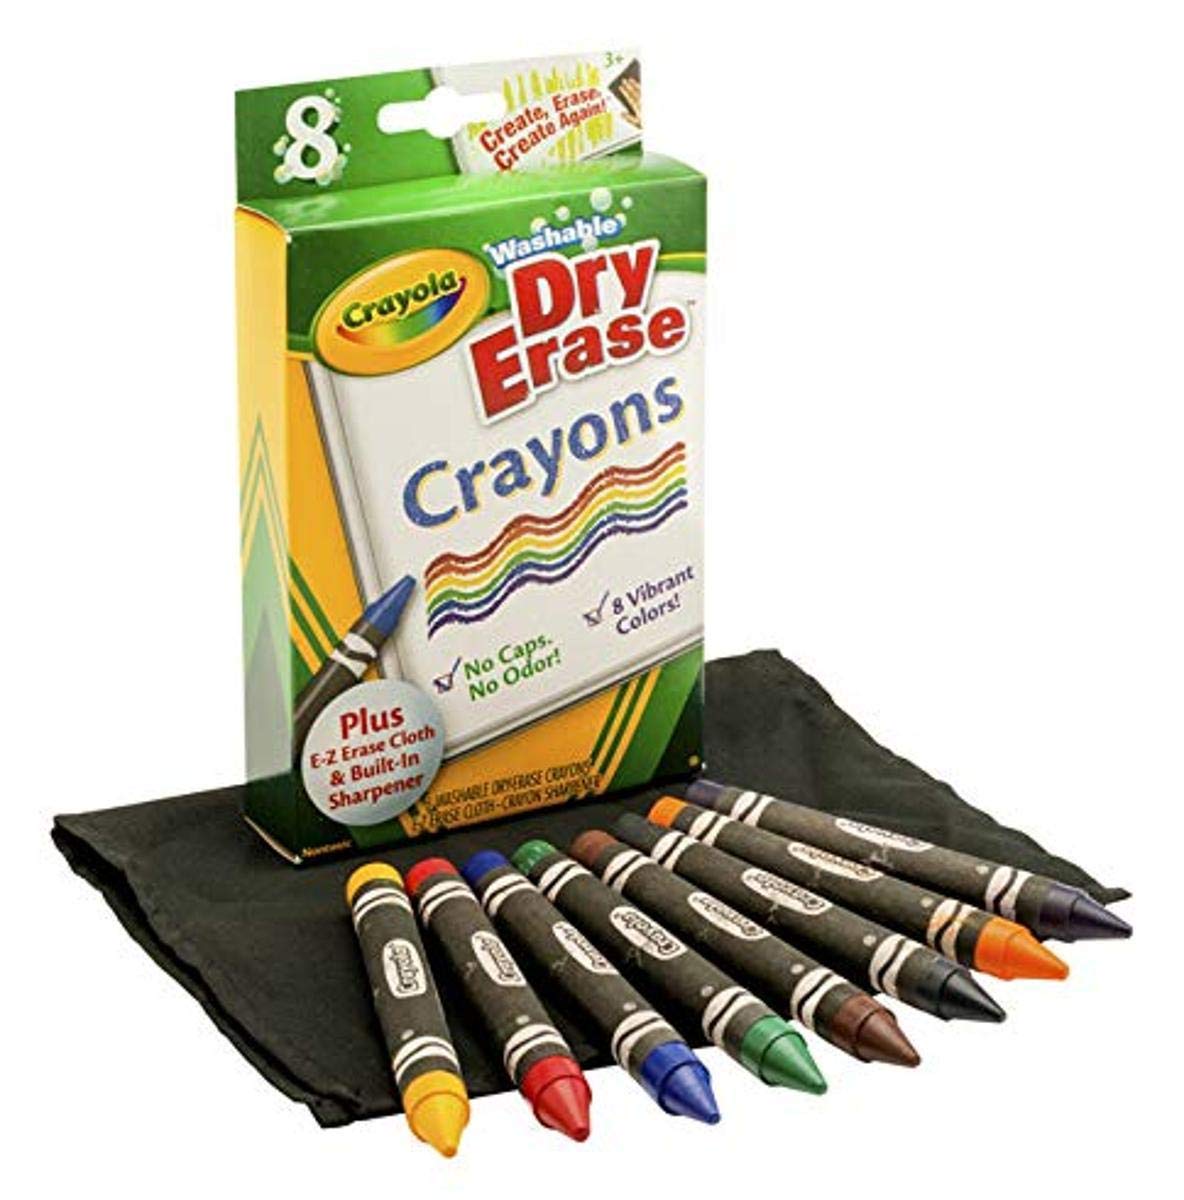 Crayola Washable Dry-Erase Crayons, 8 Classic Crayola Colors with Built In Sharpener & E-Z Erase Cloth Non-Toxic Art Tools for Kids & Toddlers 3 & Up, Easily Wipes Off Any Dry Erase Surface